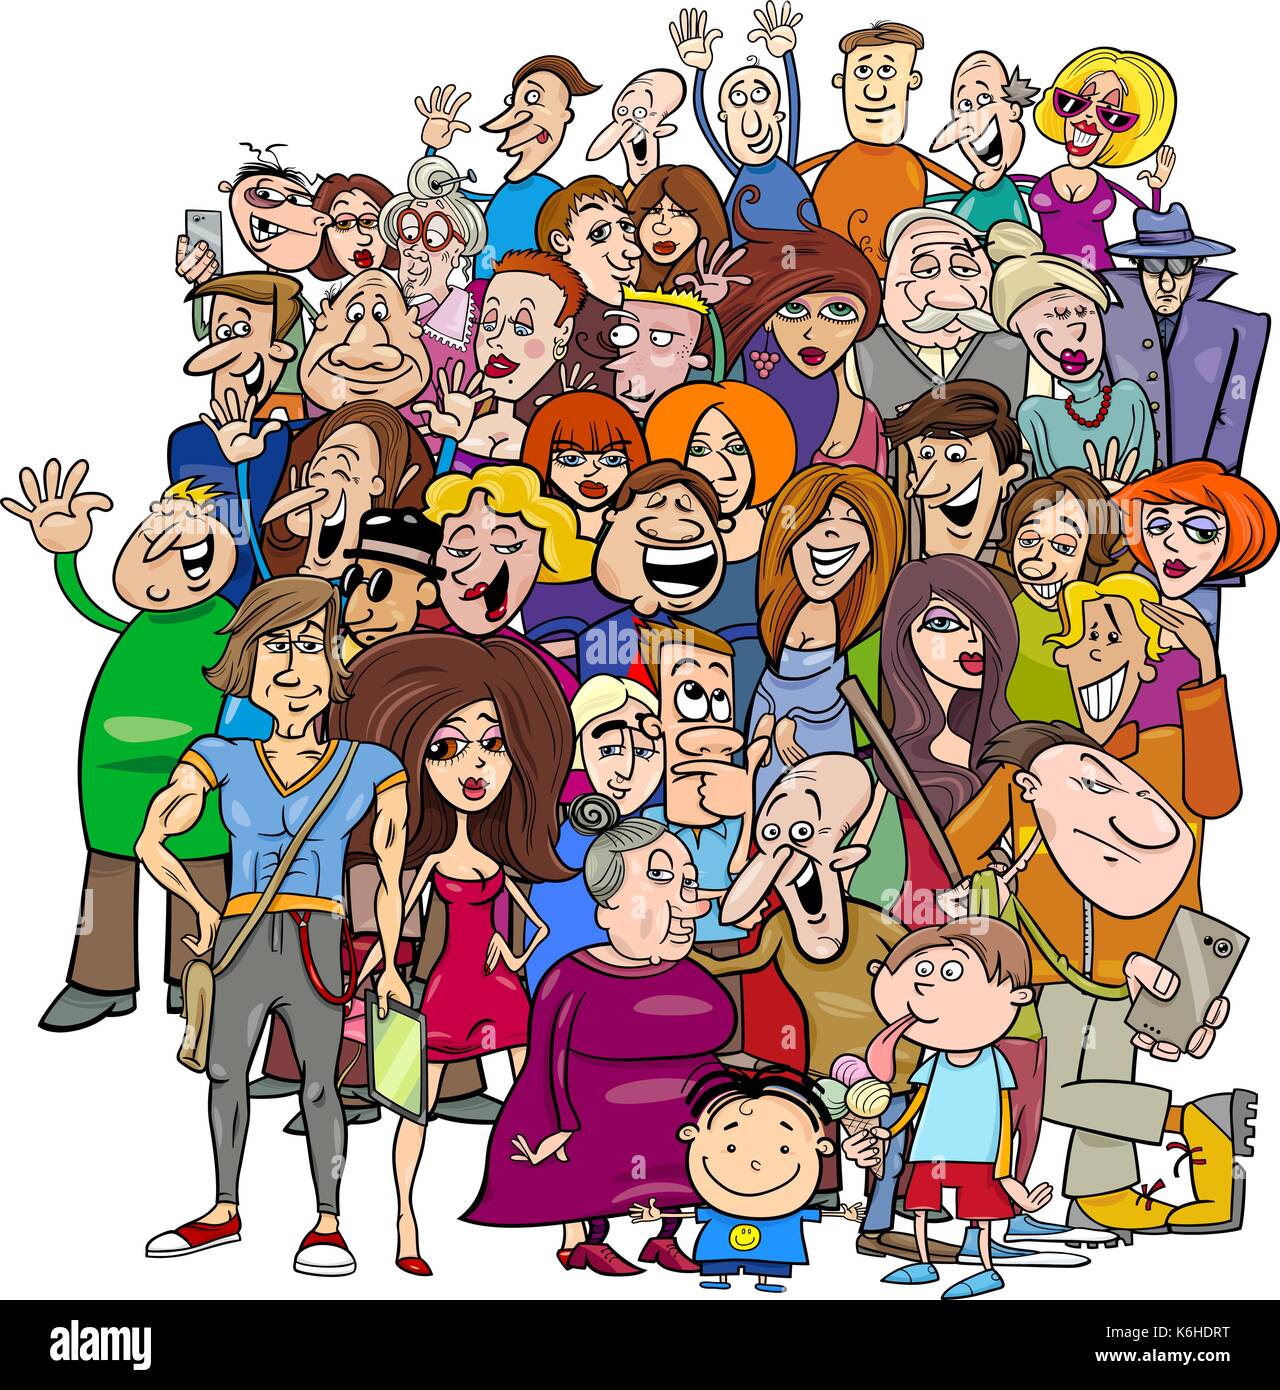 Cartoon Illustration of People Characters Group in the Crowd Stock Vector